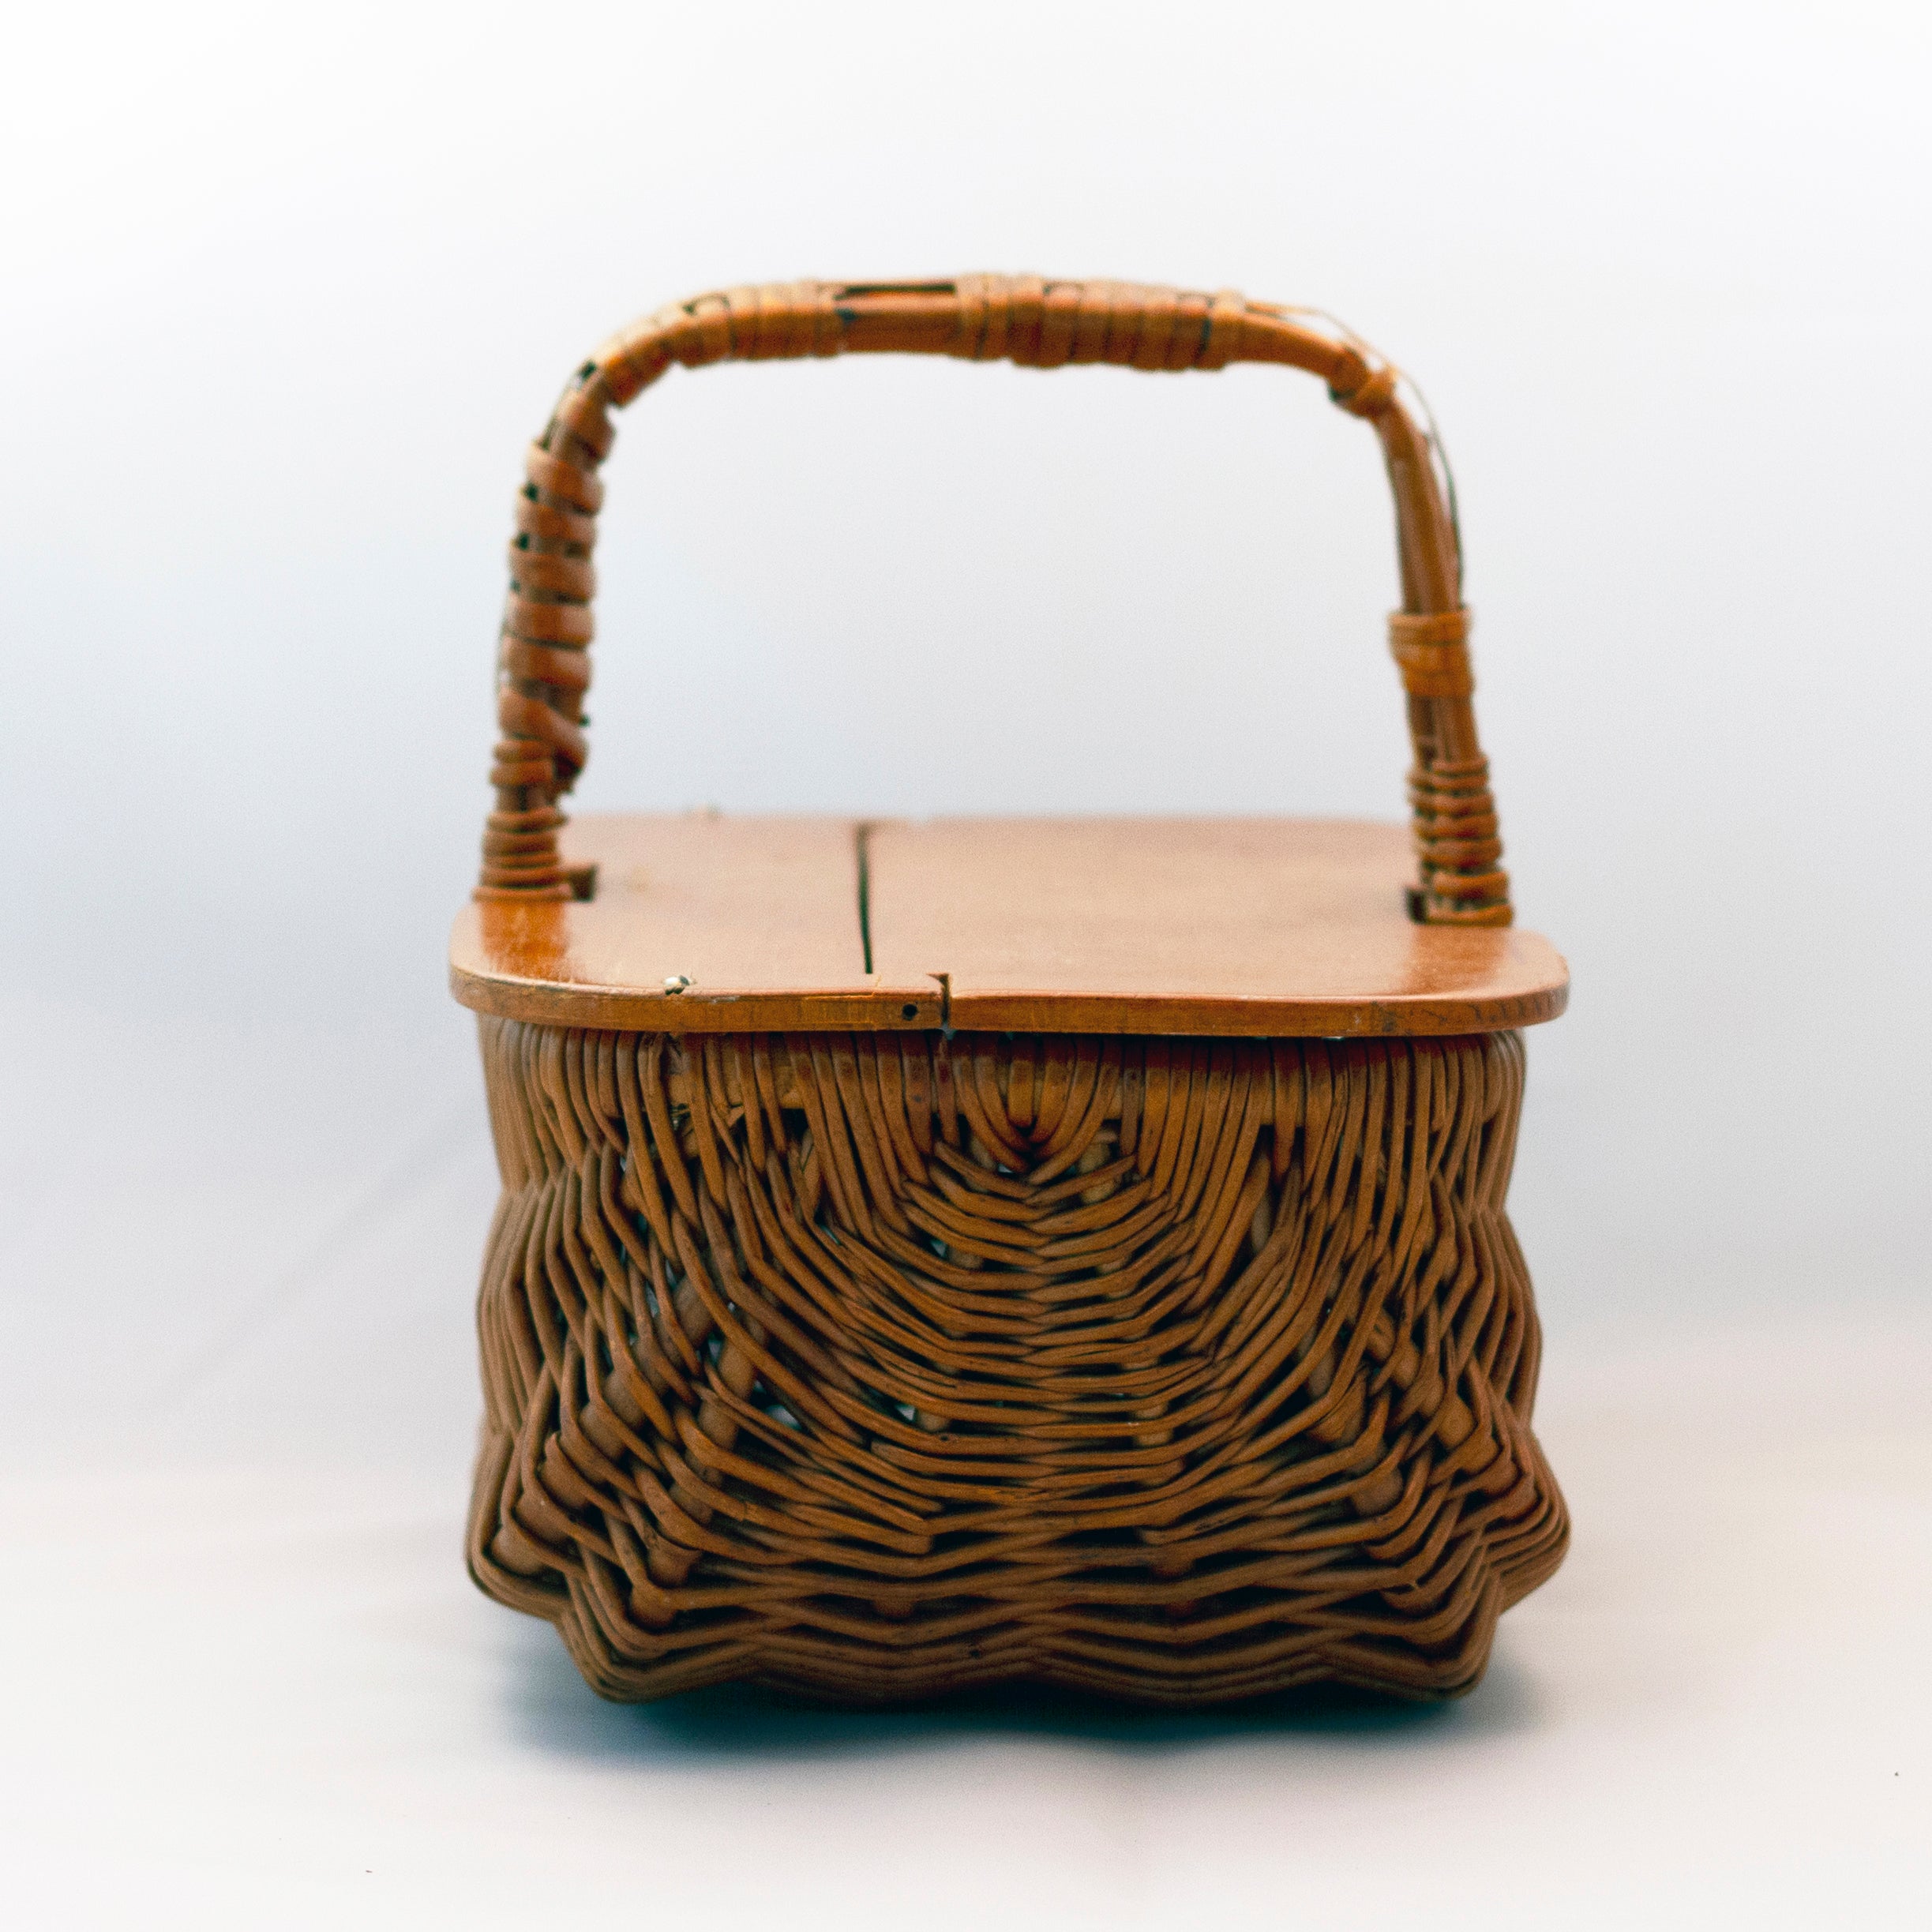 Buy Gold Wicker Bag Online In India - Etsy India